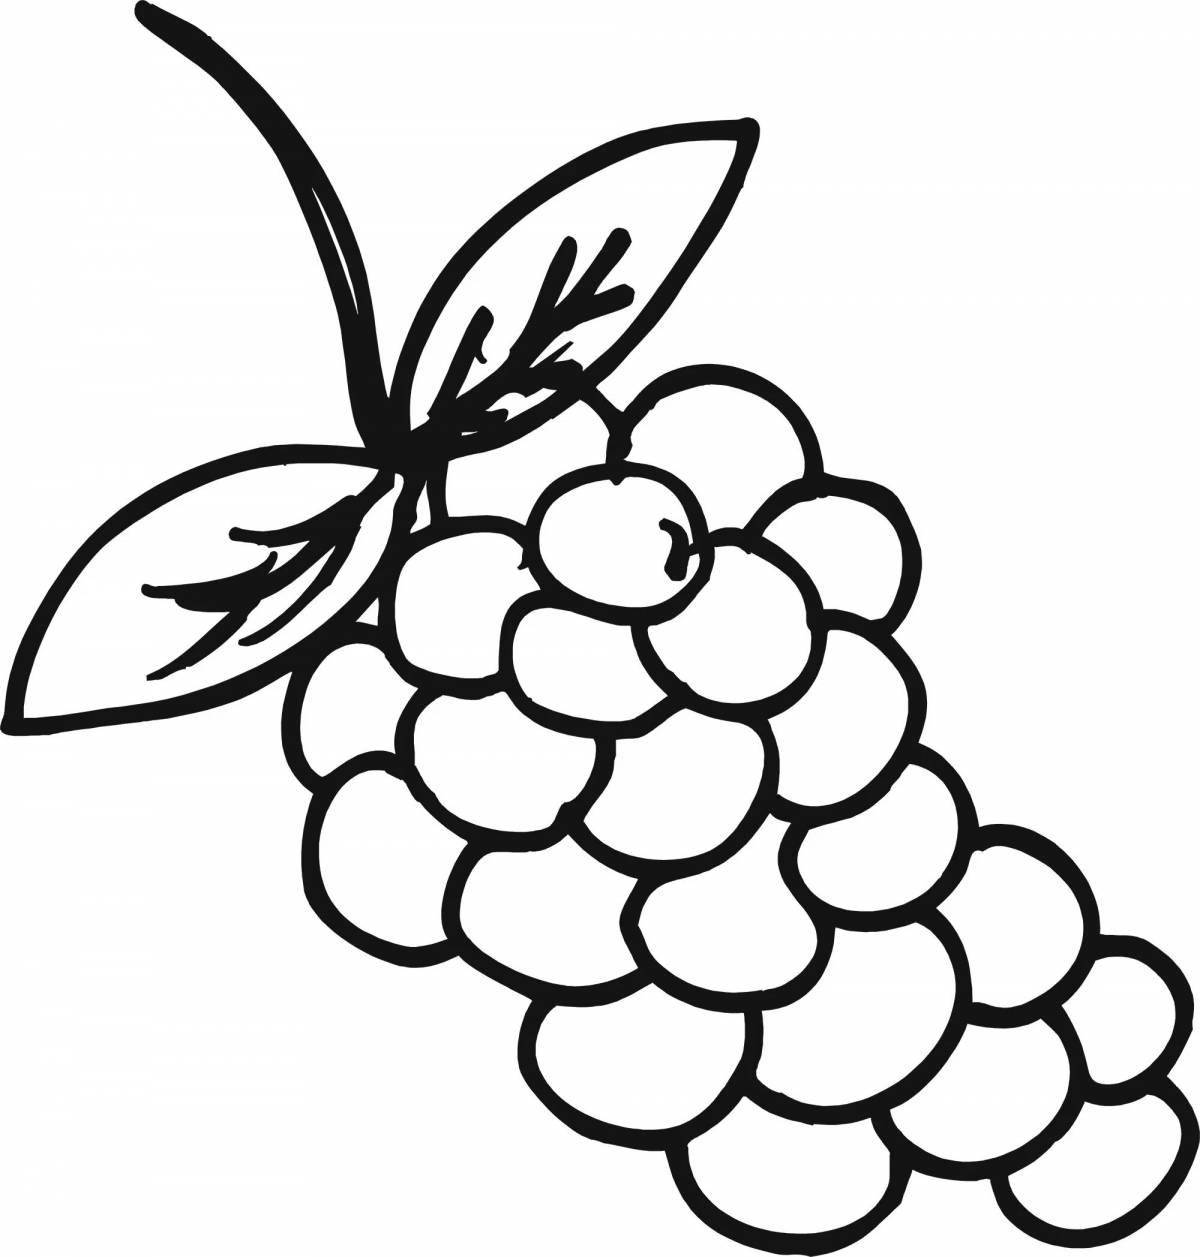 Shining grapes coloring book for babies